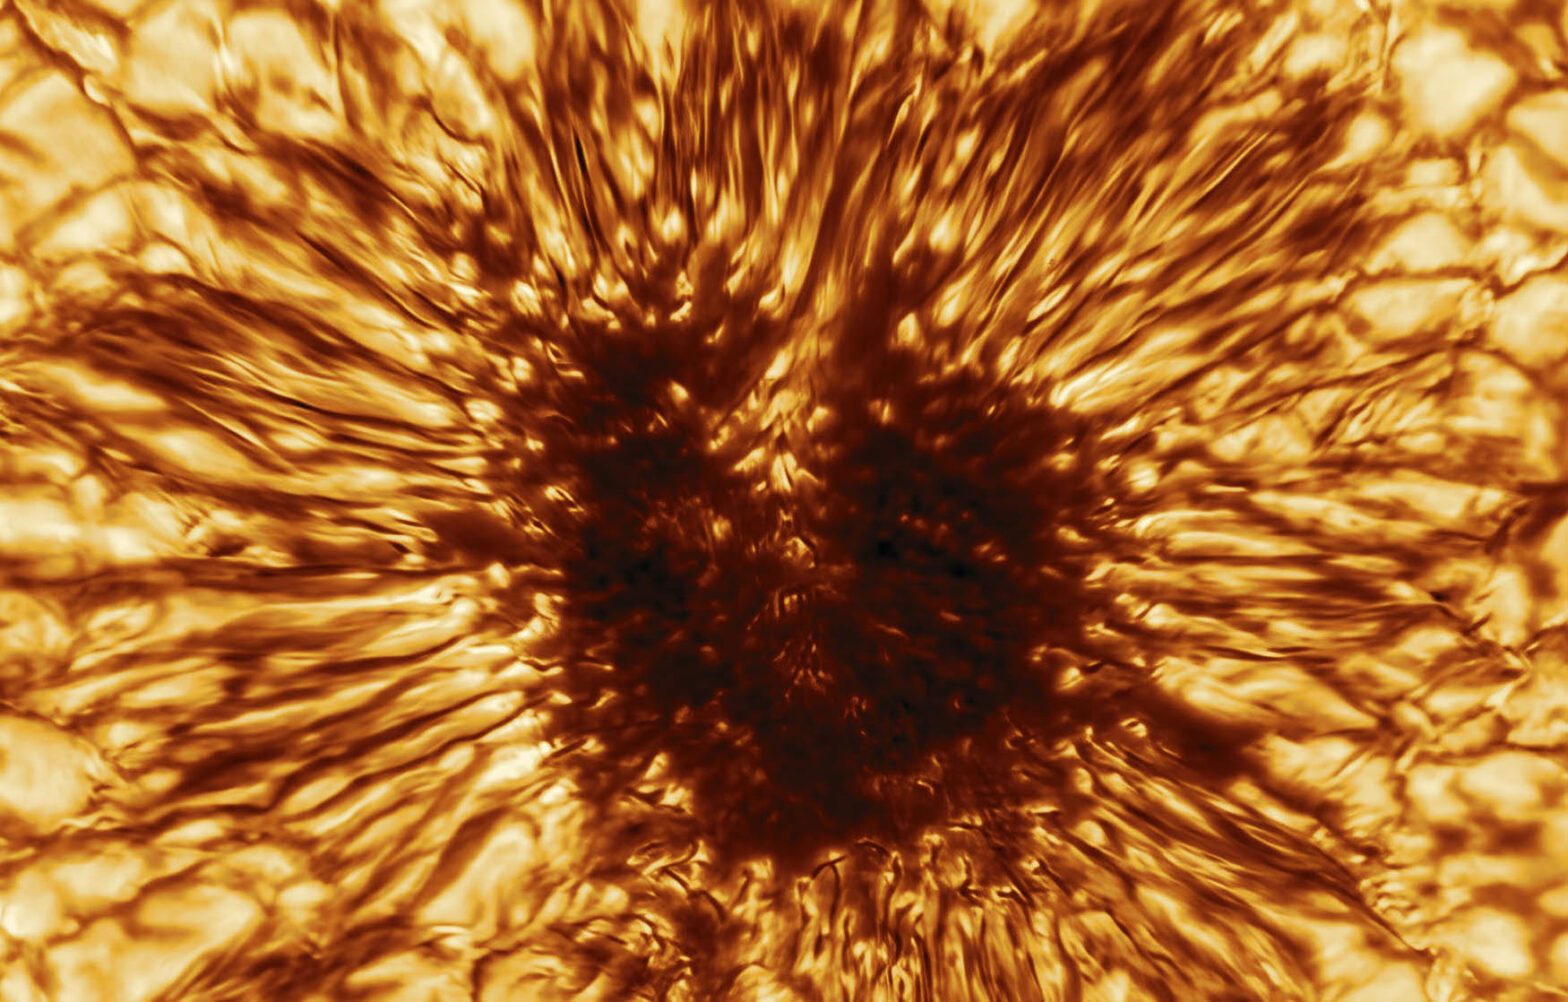 Never-before-seen time-lapse shows sunspot activity peaking on the Sun